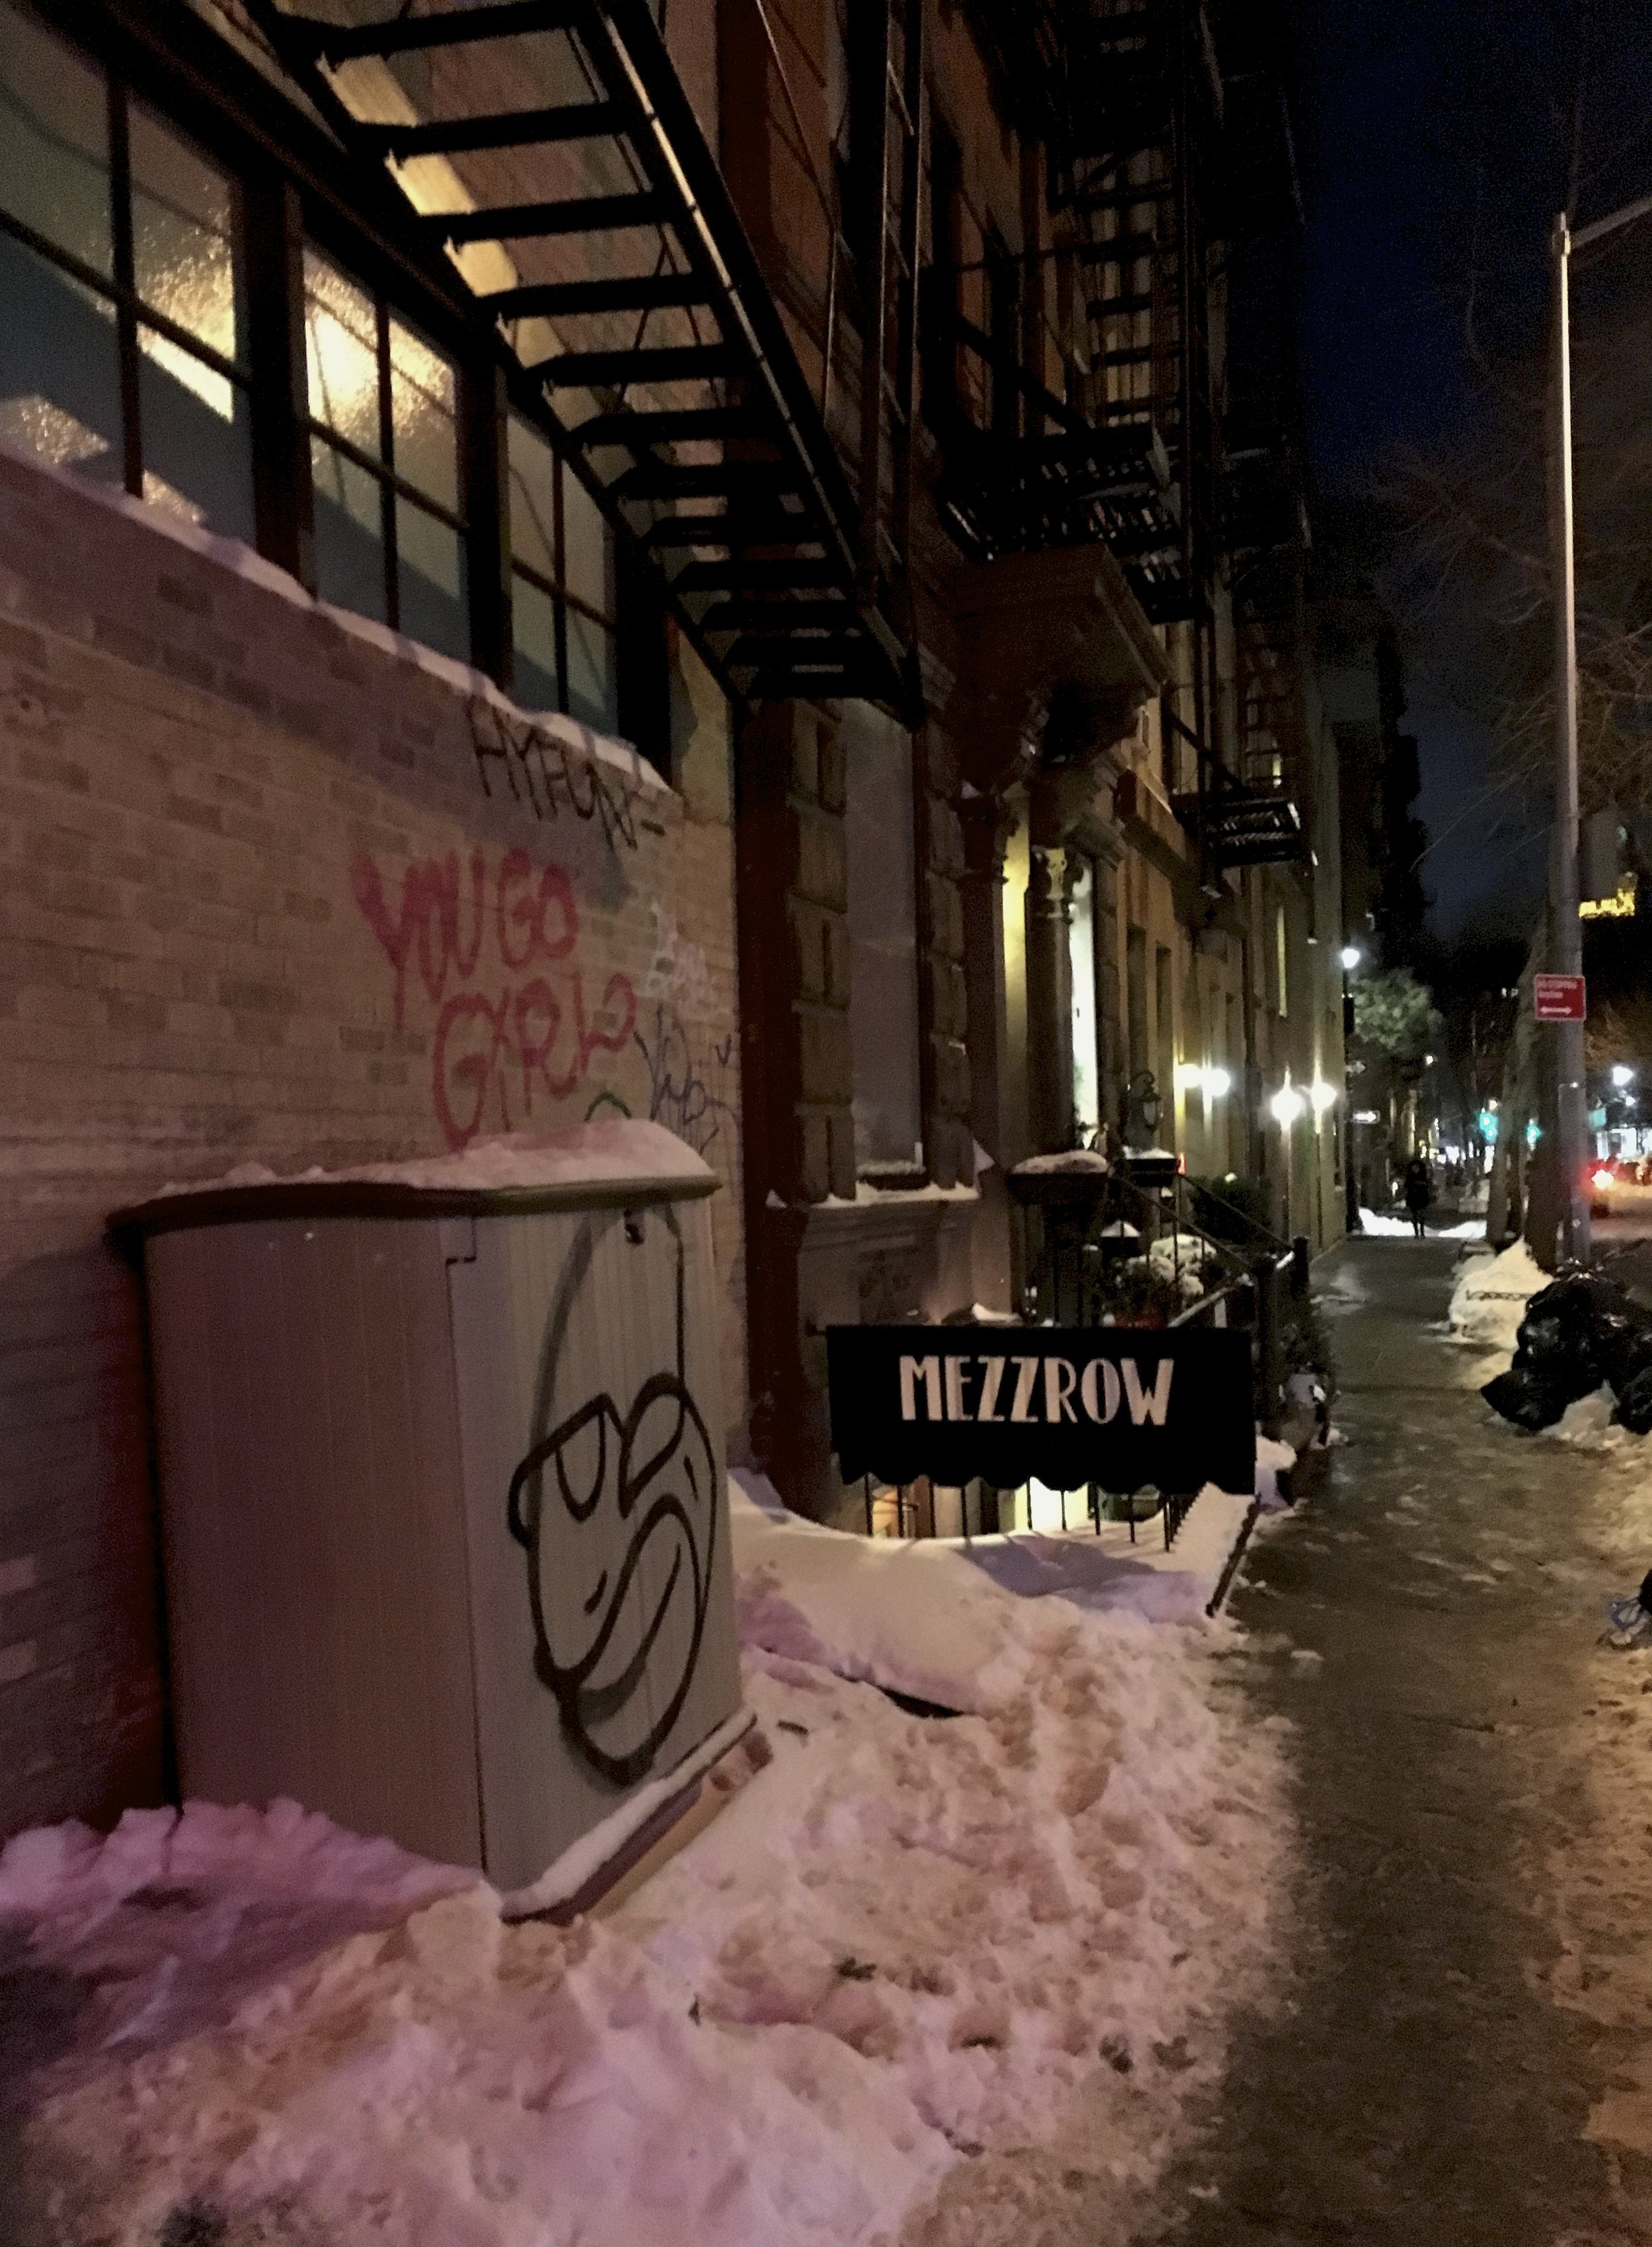 "MEZZROW is a jazz venue, a listening room and lounge in Greenwich Village located in the basement of 163 W. 10th St.  We are easy to miss so look carefully!"